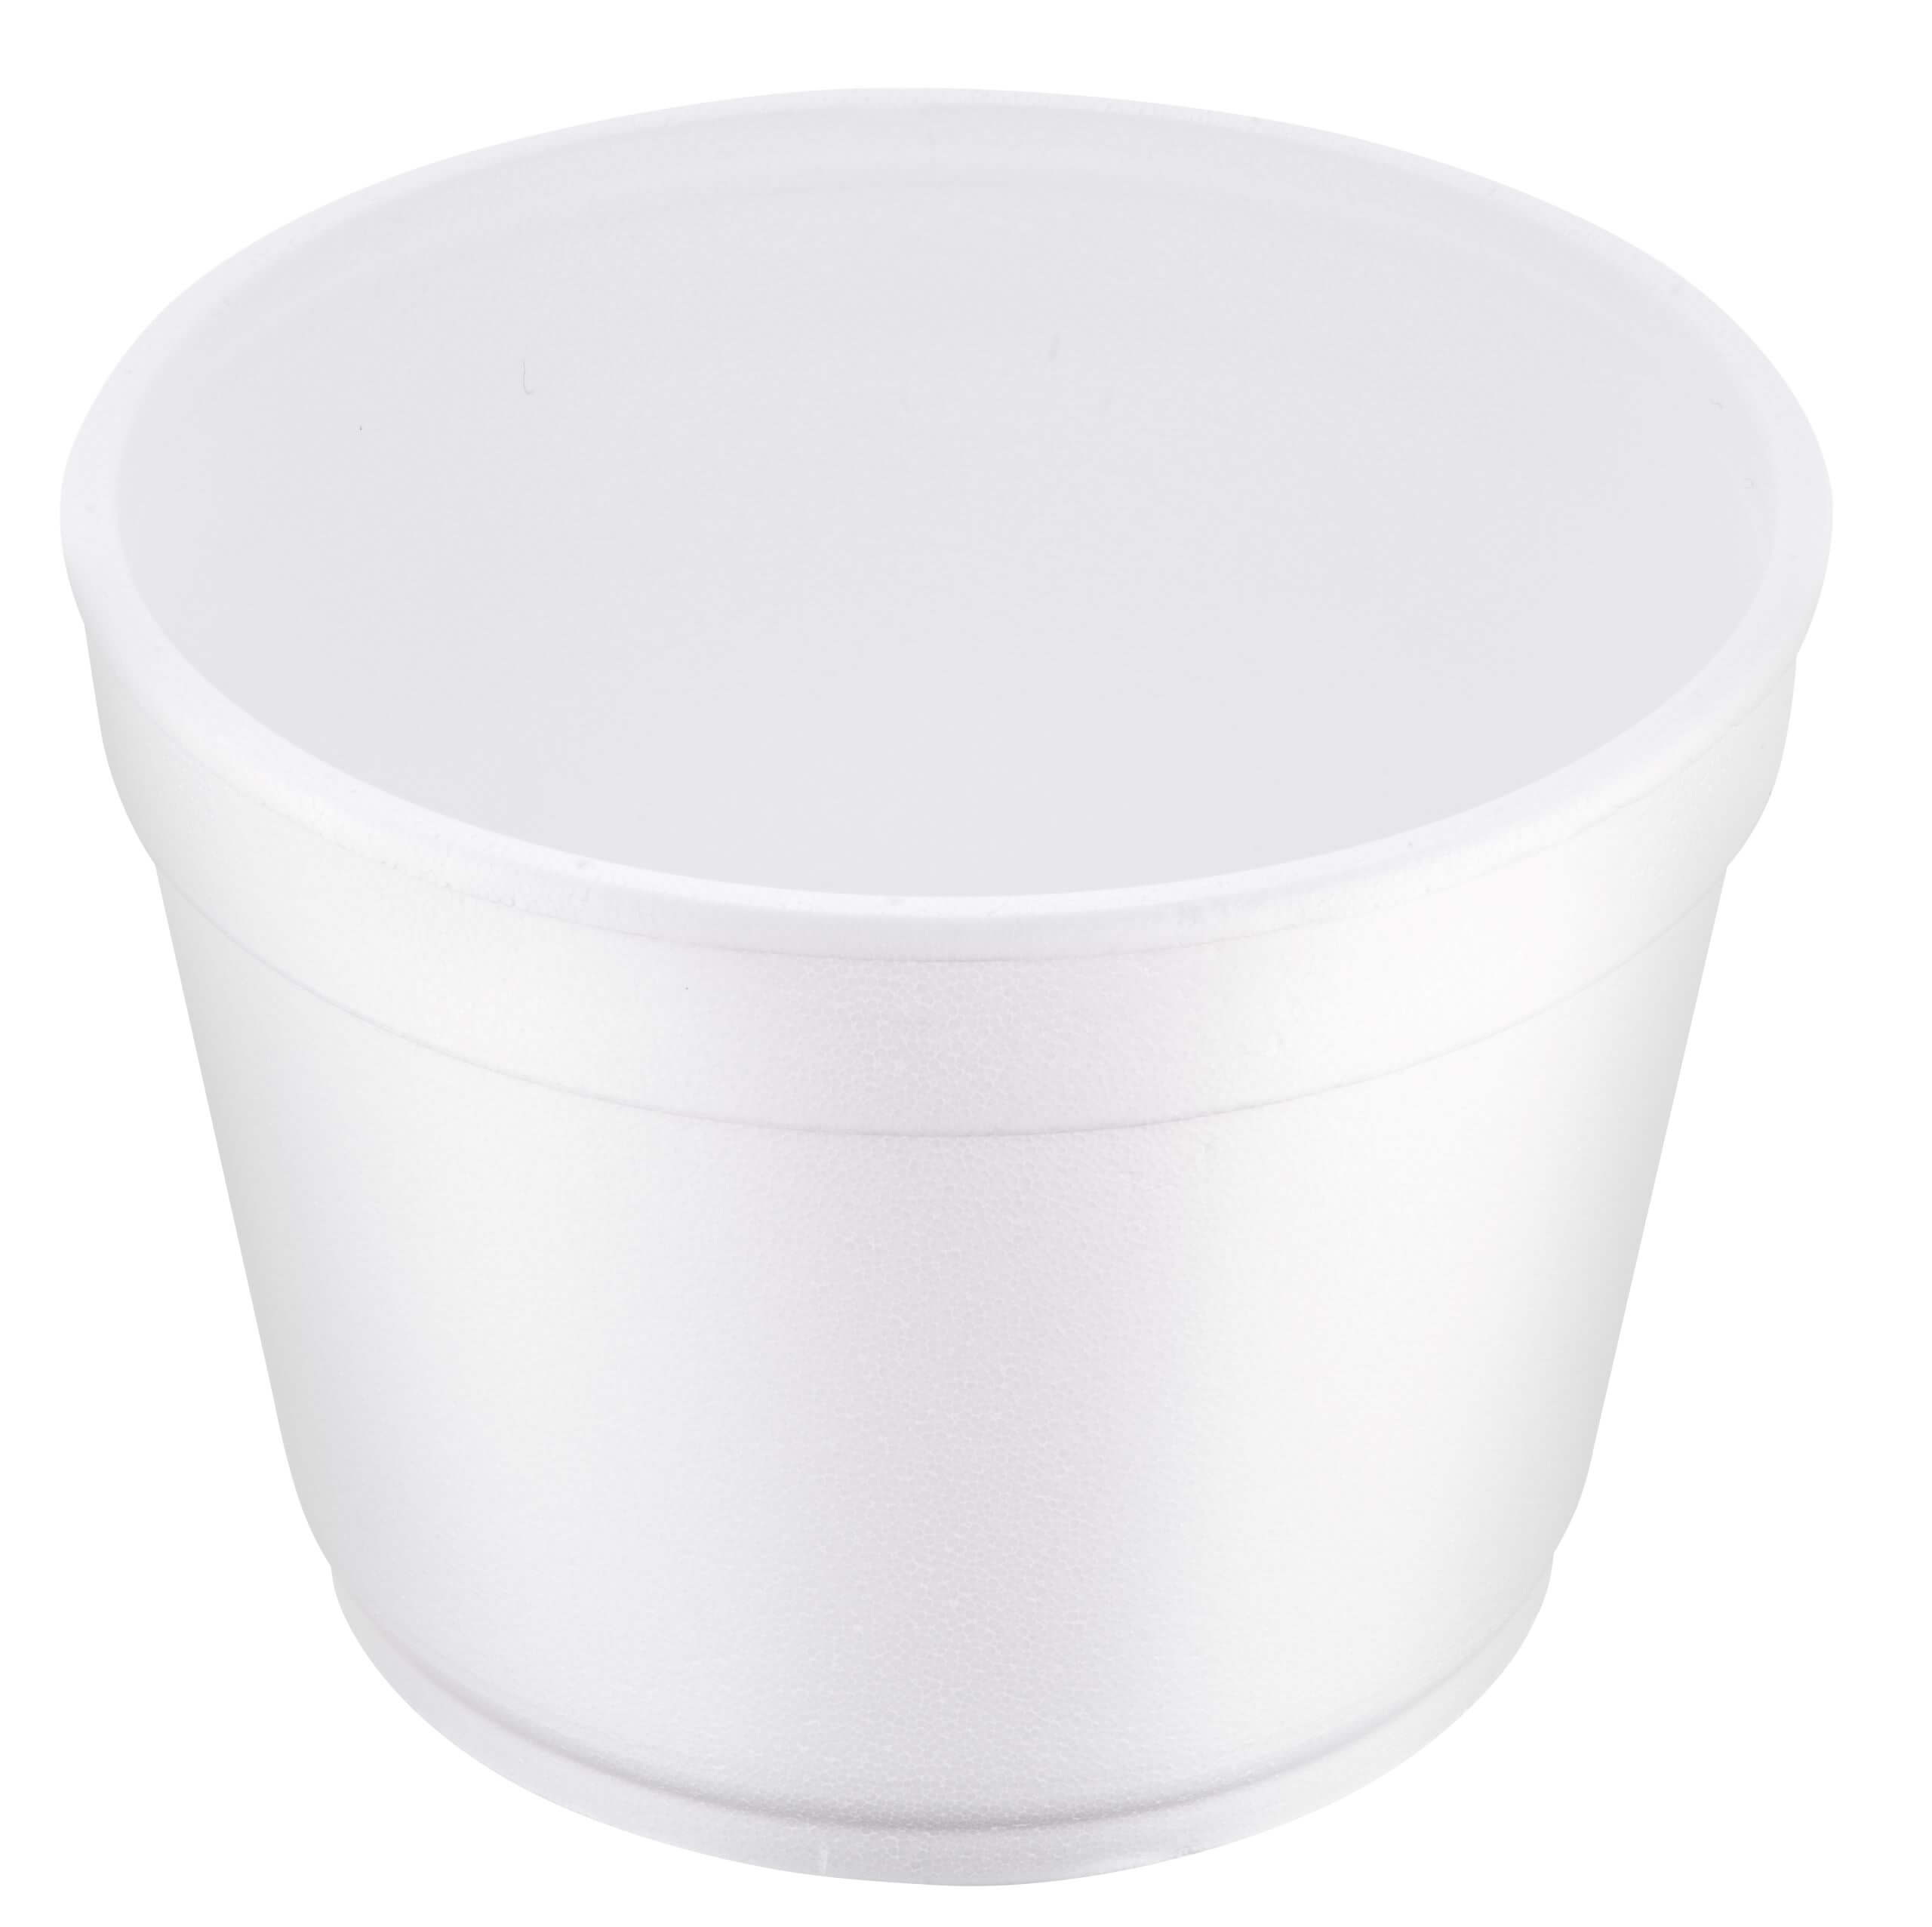 An image of a Disposable Polystyrene Bowl.